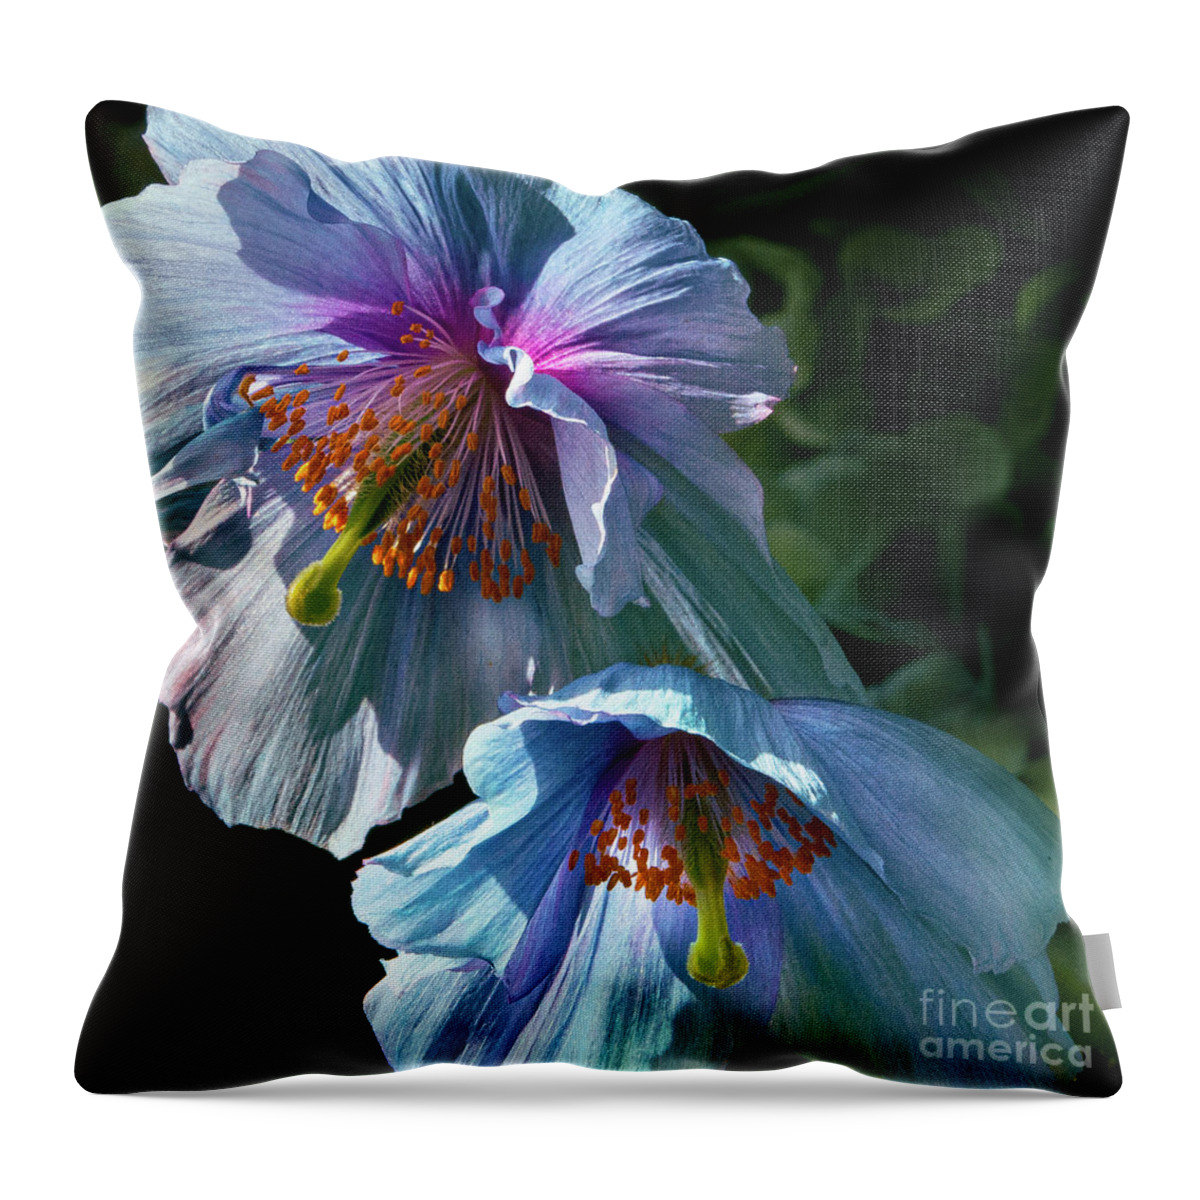 Conservatories Throw Pillow featuring the photograph Silk Poppies by Marilyn Cornwell